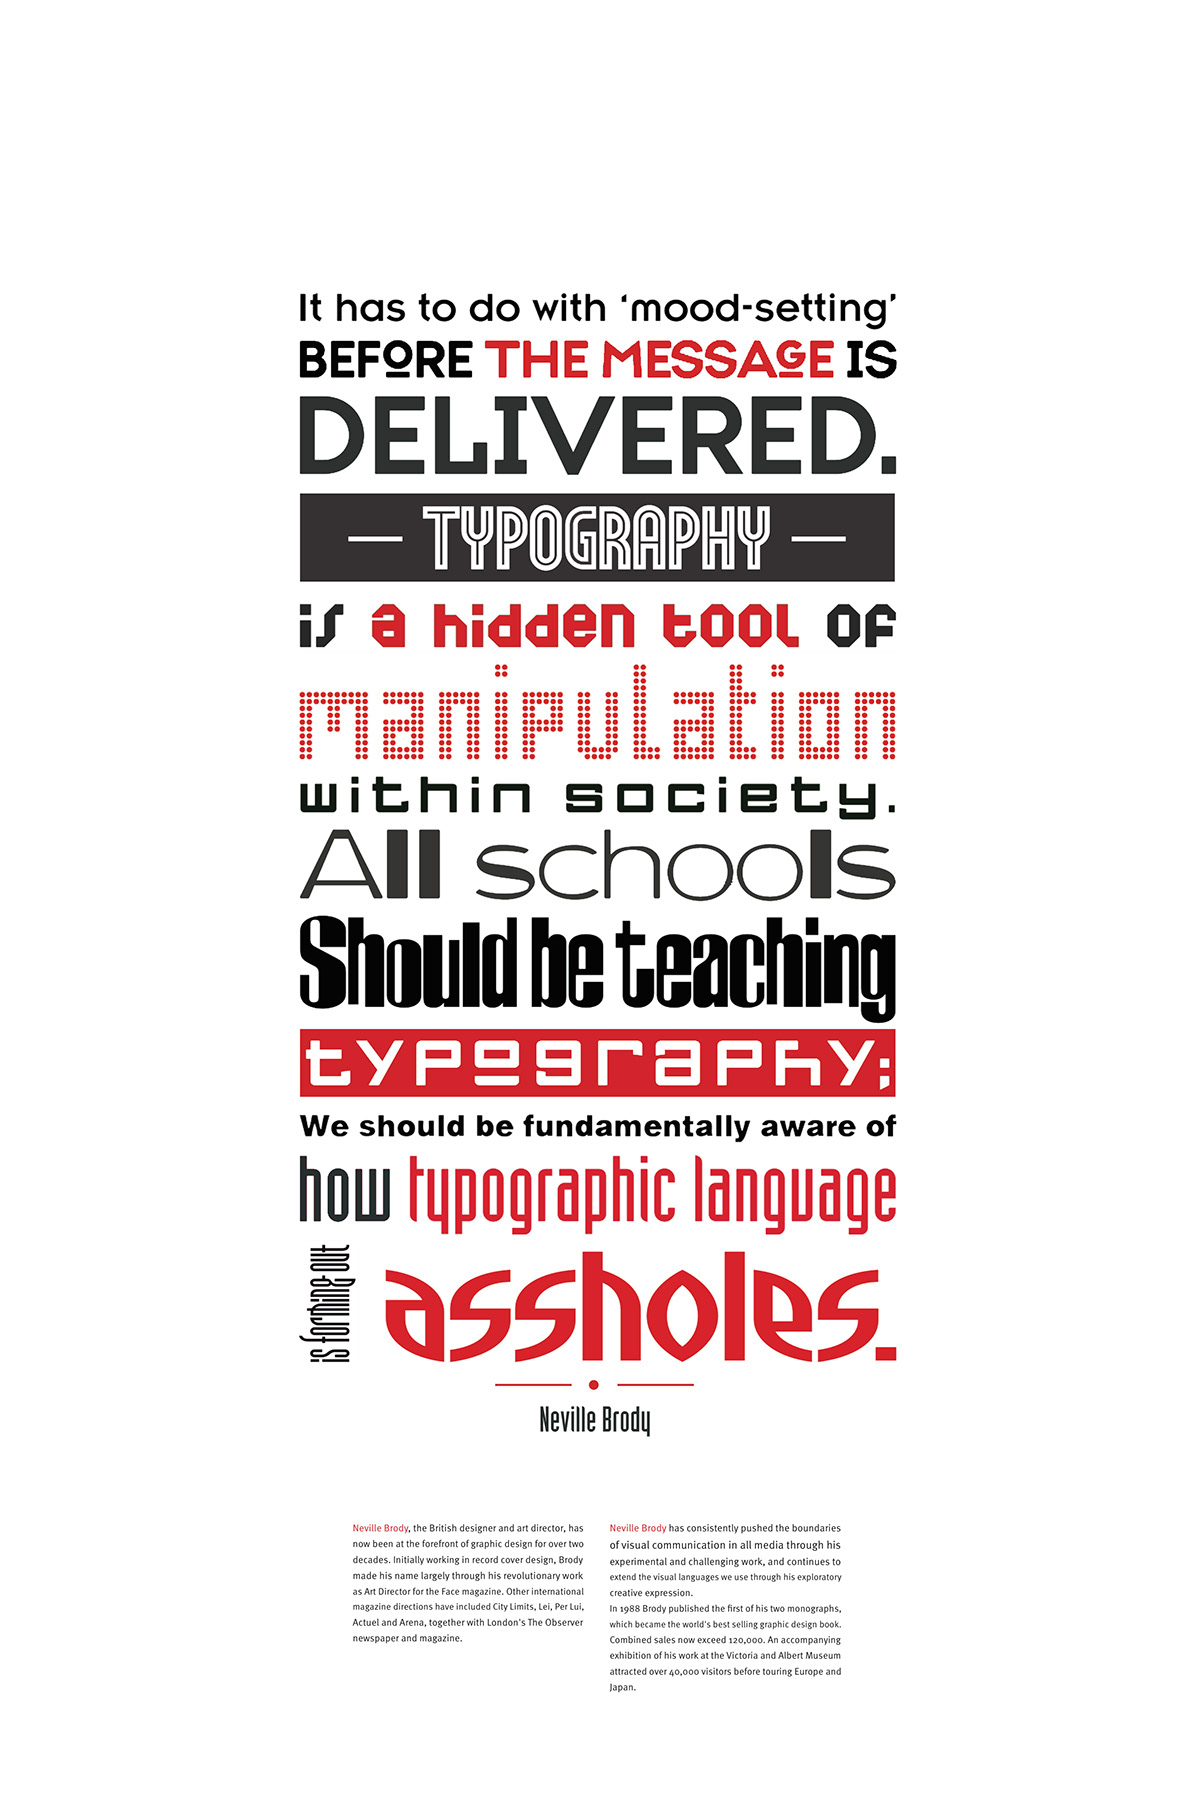 Neville Brody poster design quote